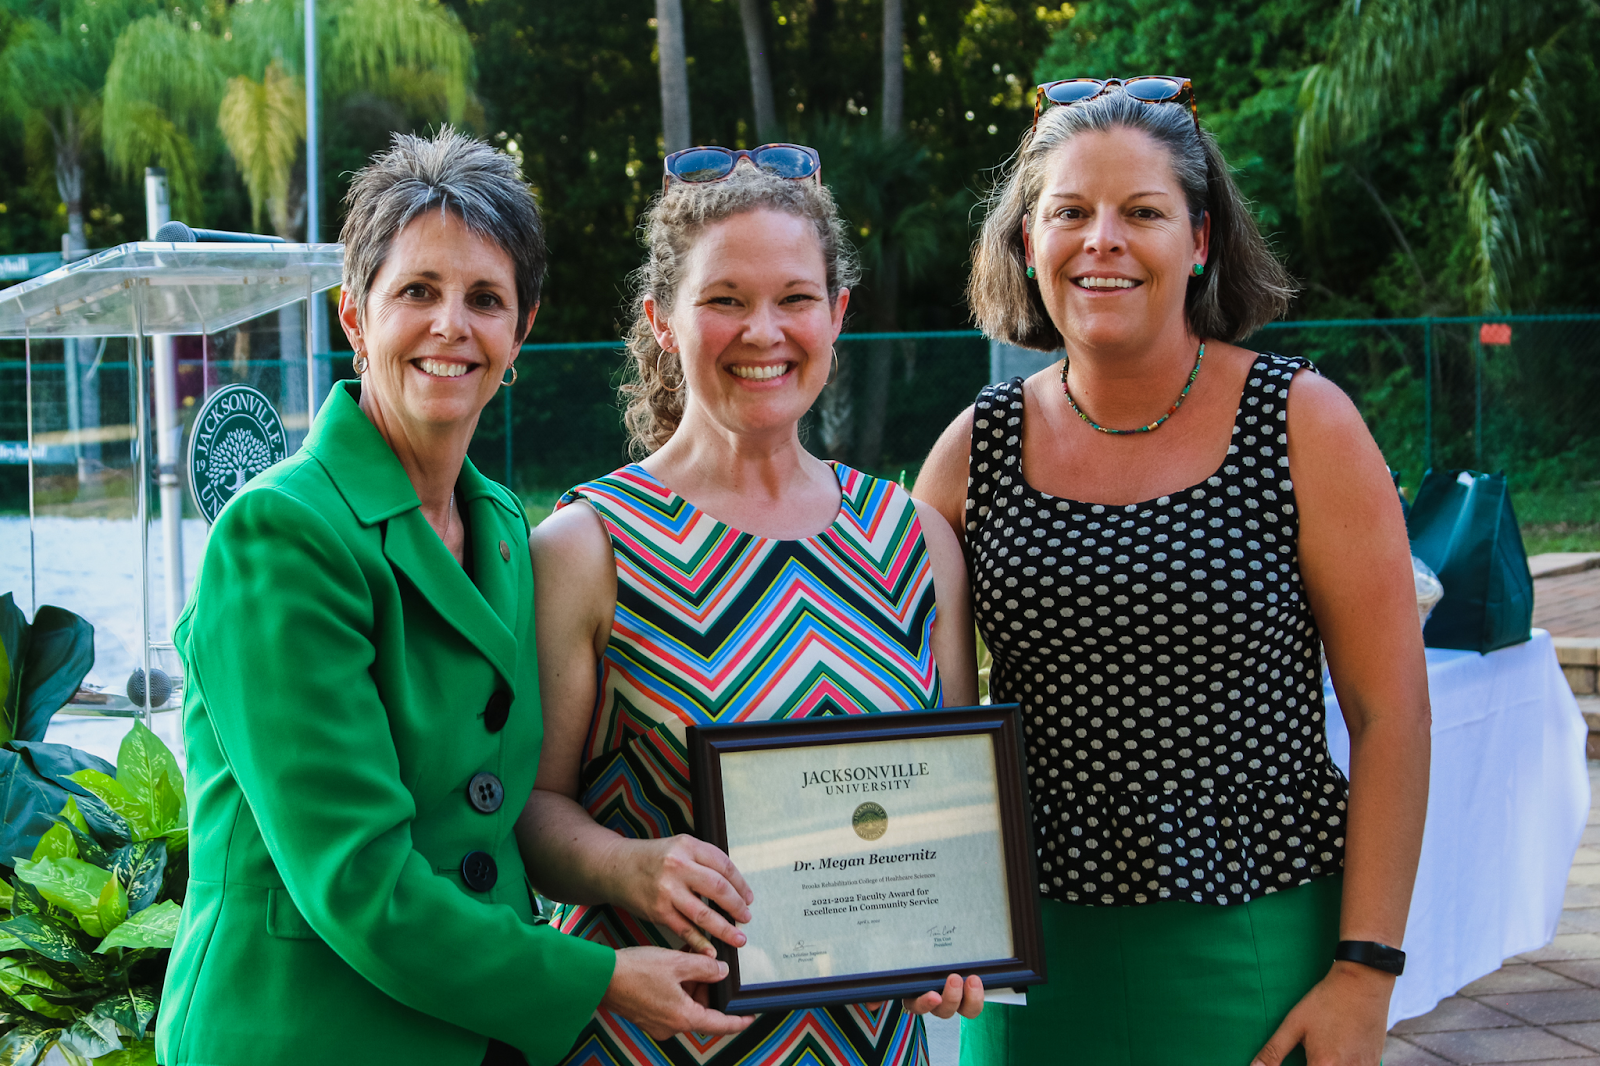 Dr. Bewernitz (middle) is recognized with the Faculty Excellence Award for Community Service. Photo by Taylor Sloan.